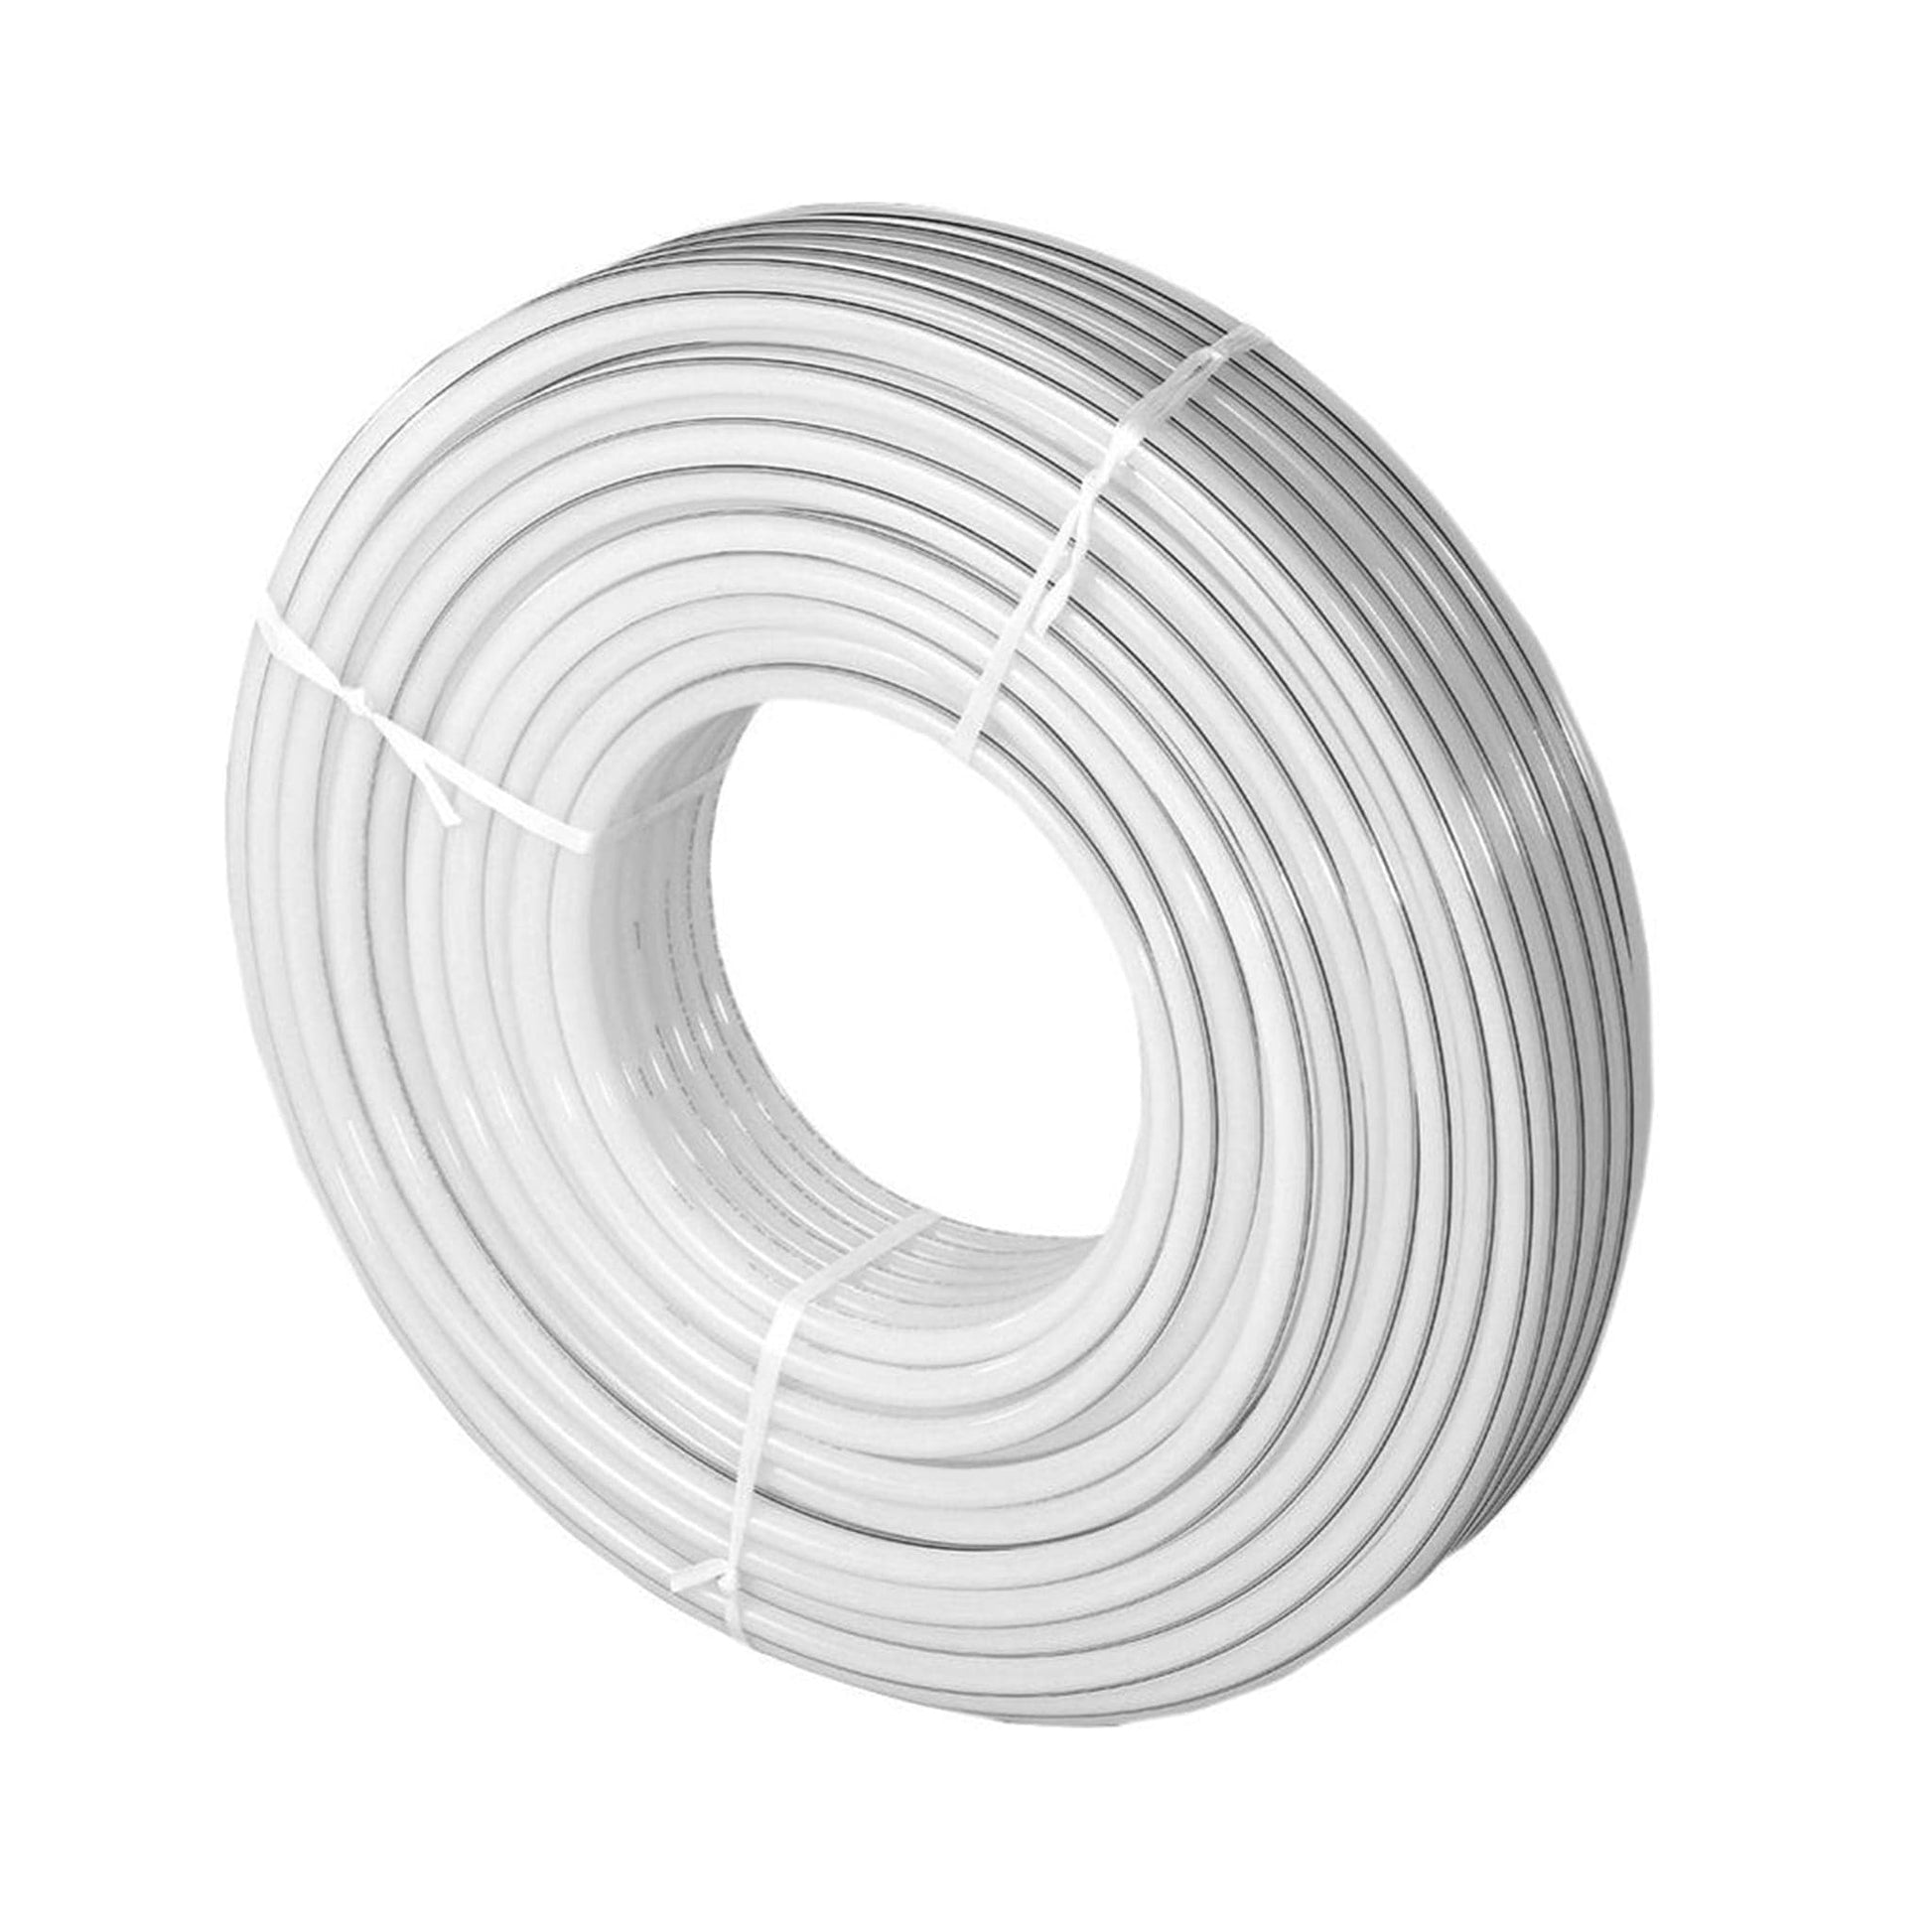 Uponor 16x2mm PERT Pipe 240m coil | 1086575 BM01684